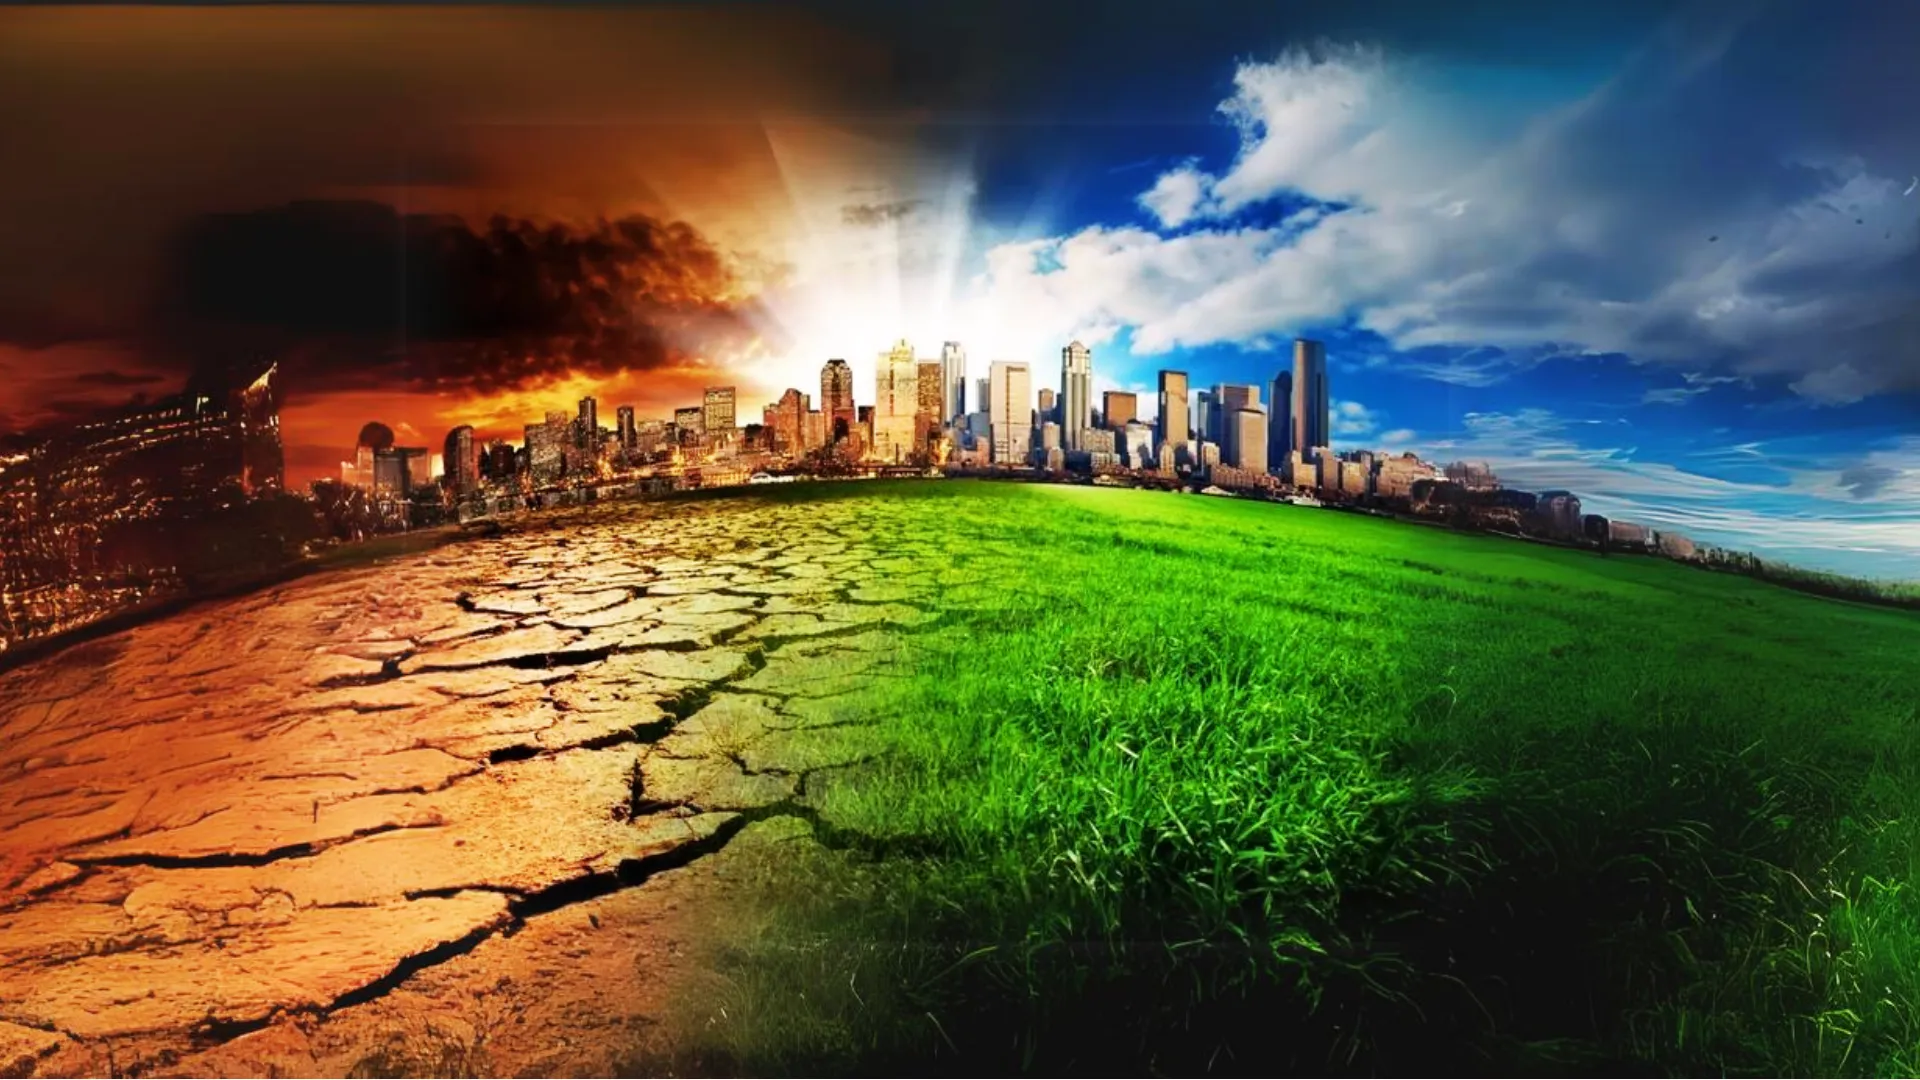 Climate Change & Food Security in South Asia